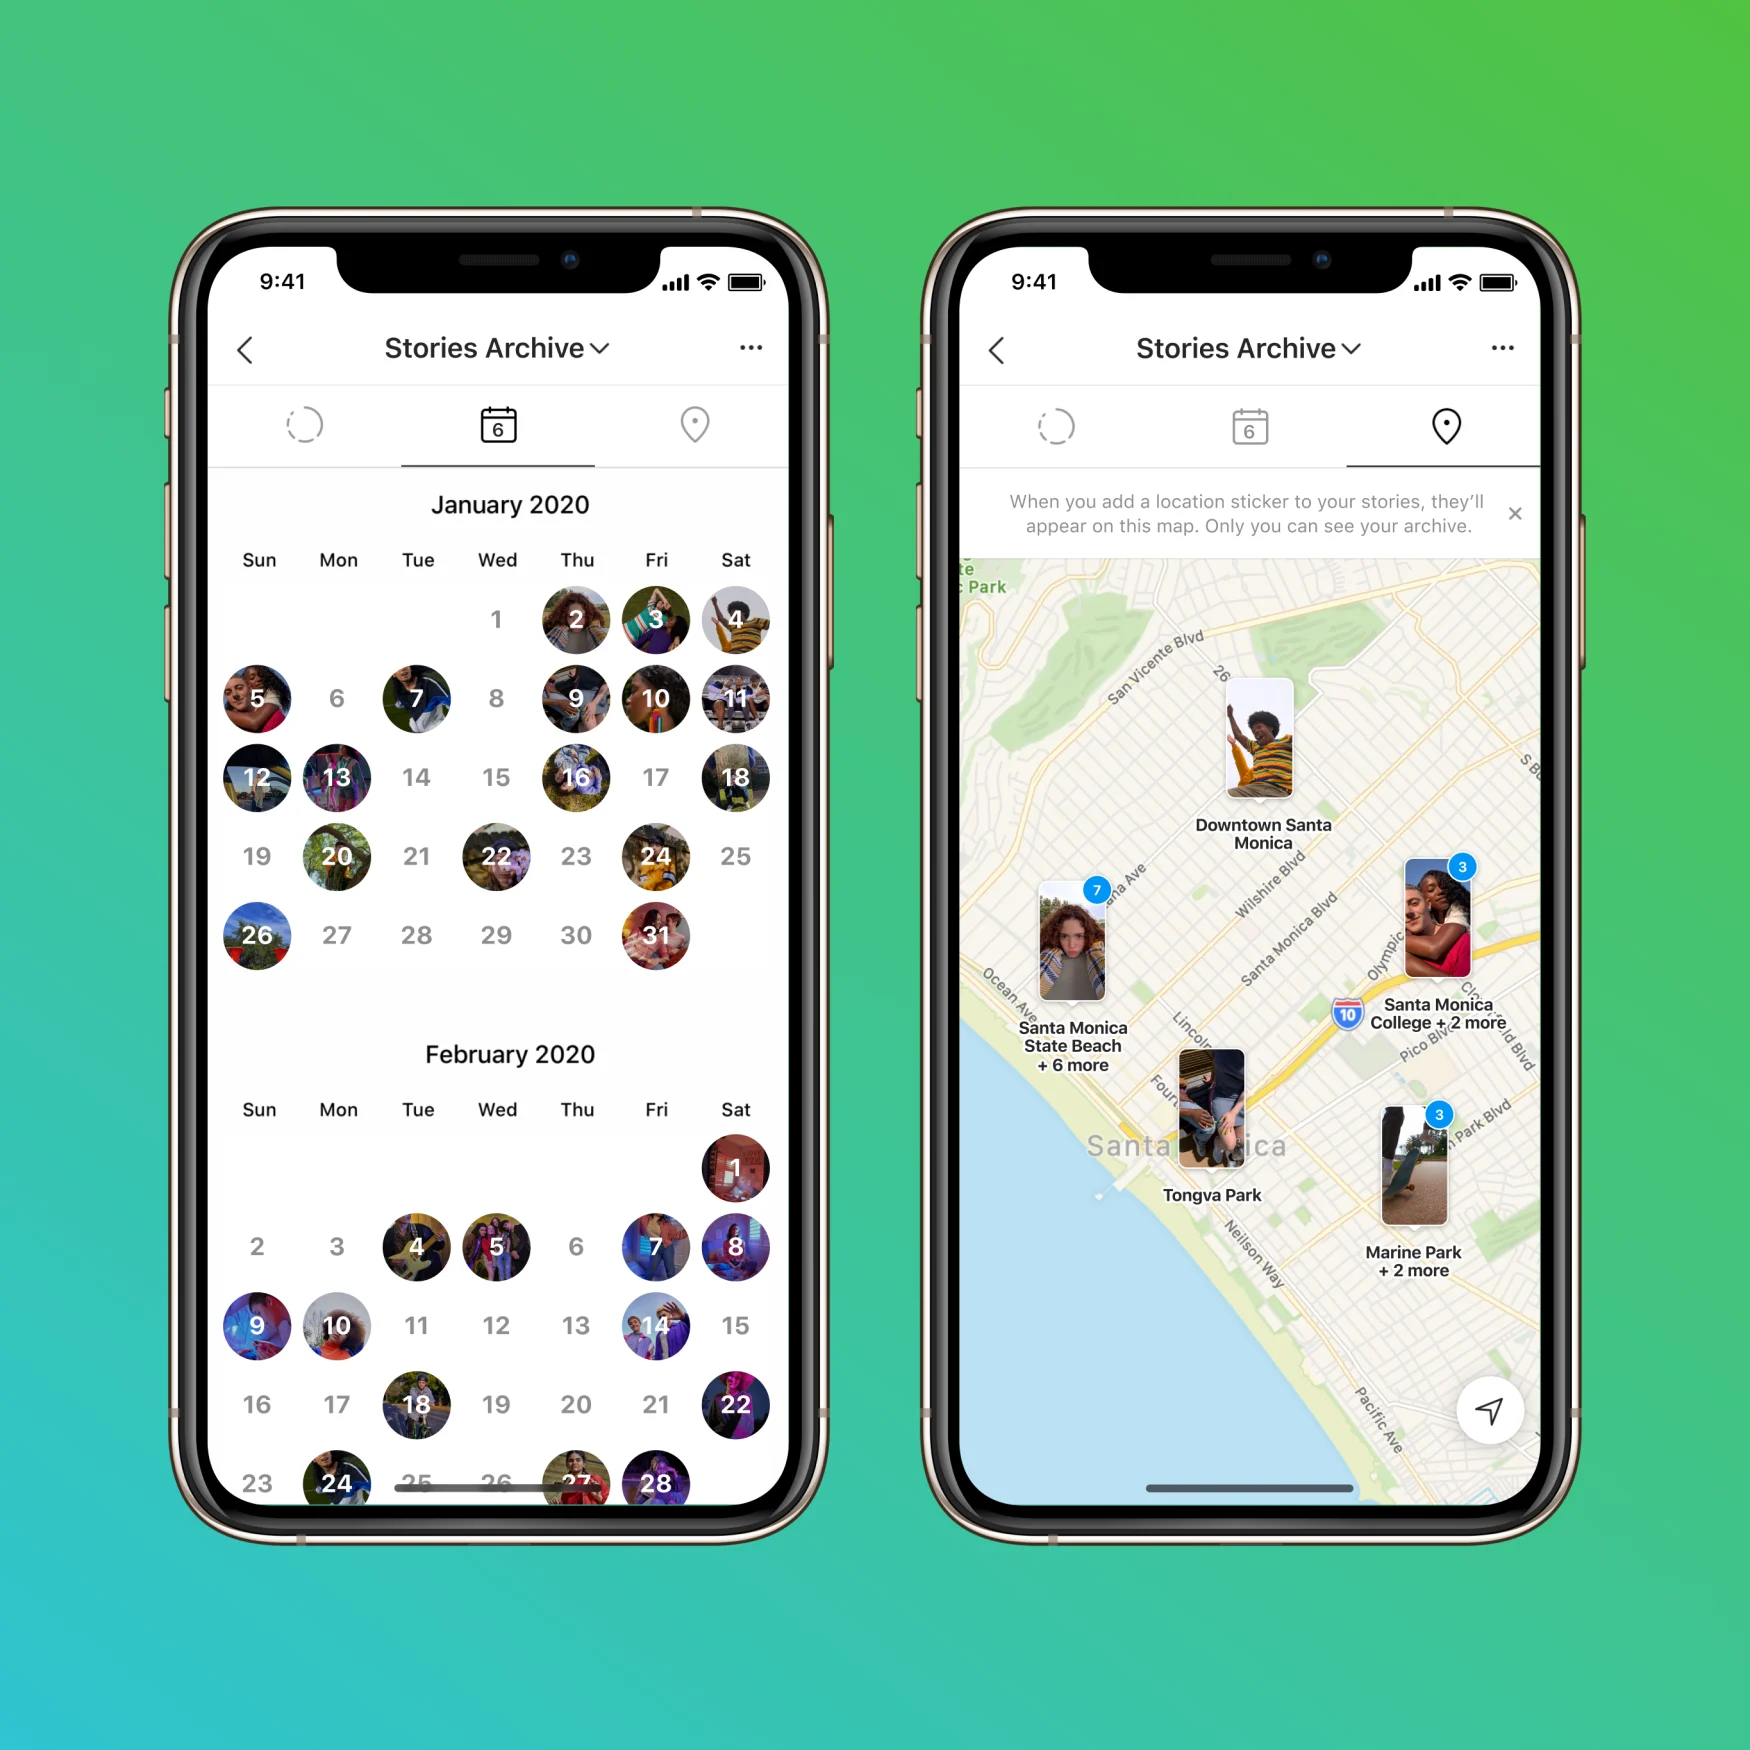 Instagram is bringing back its photo map as part of its Stories Archive. 